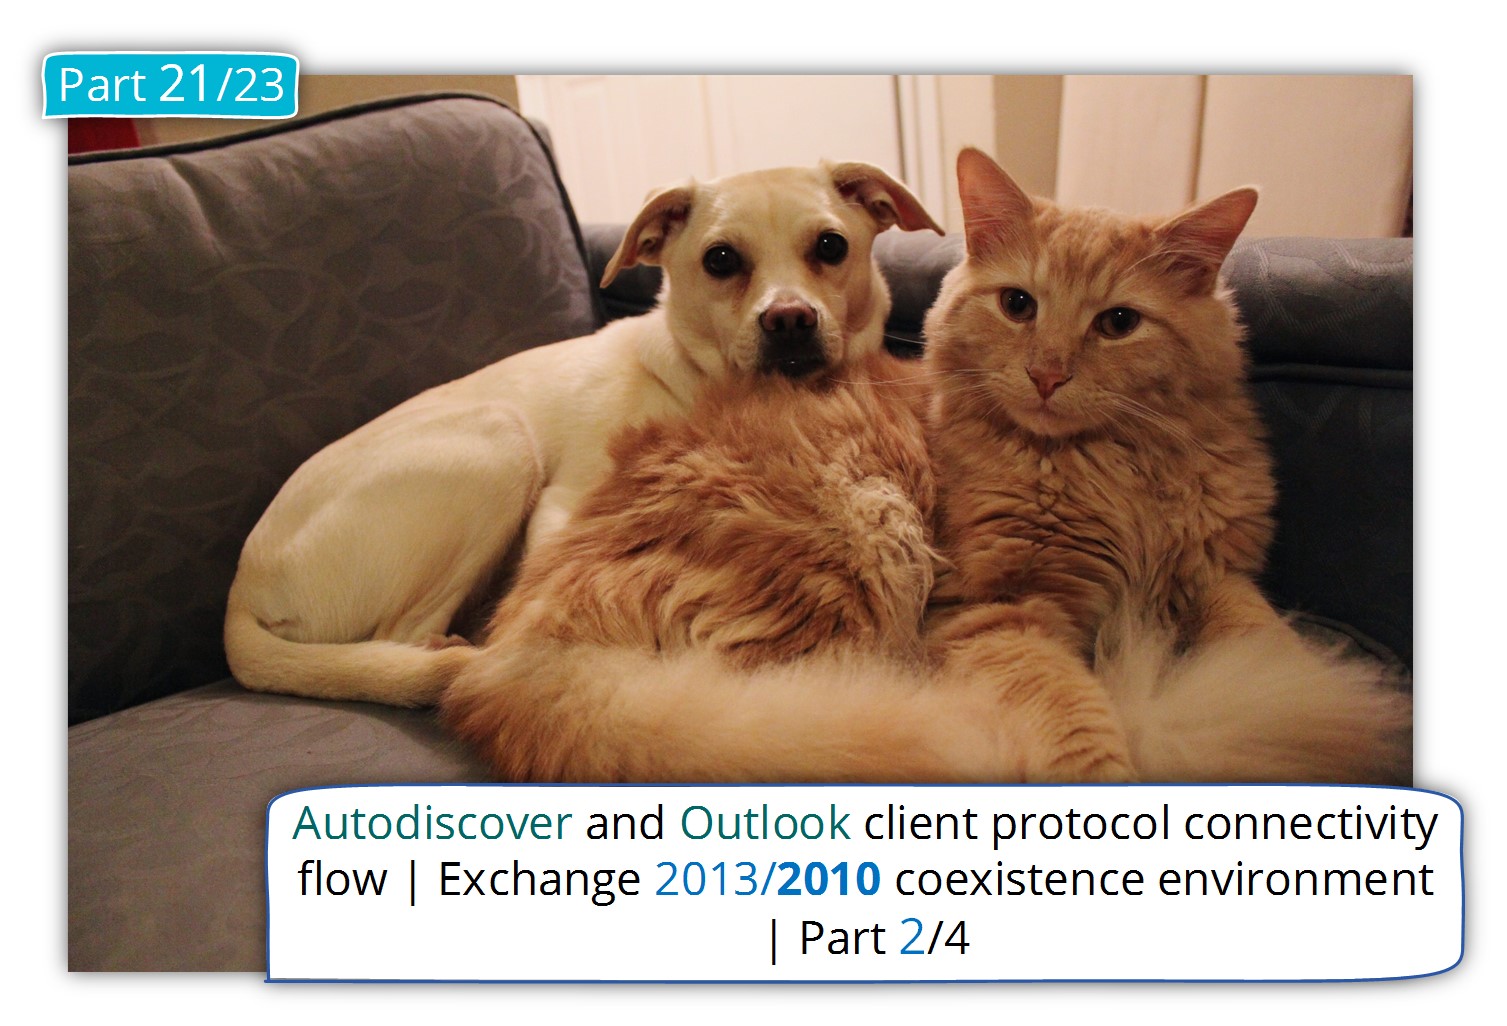 Autodiscover and Outlook client protocol connectivity flow in Exchange 2013/2010 coexistence environment | 2/4